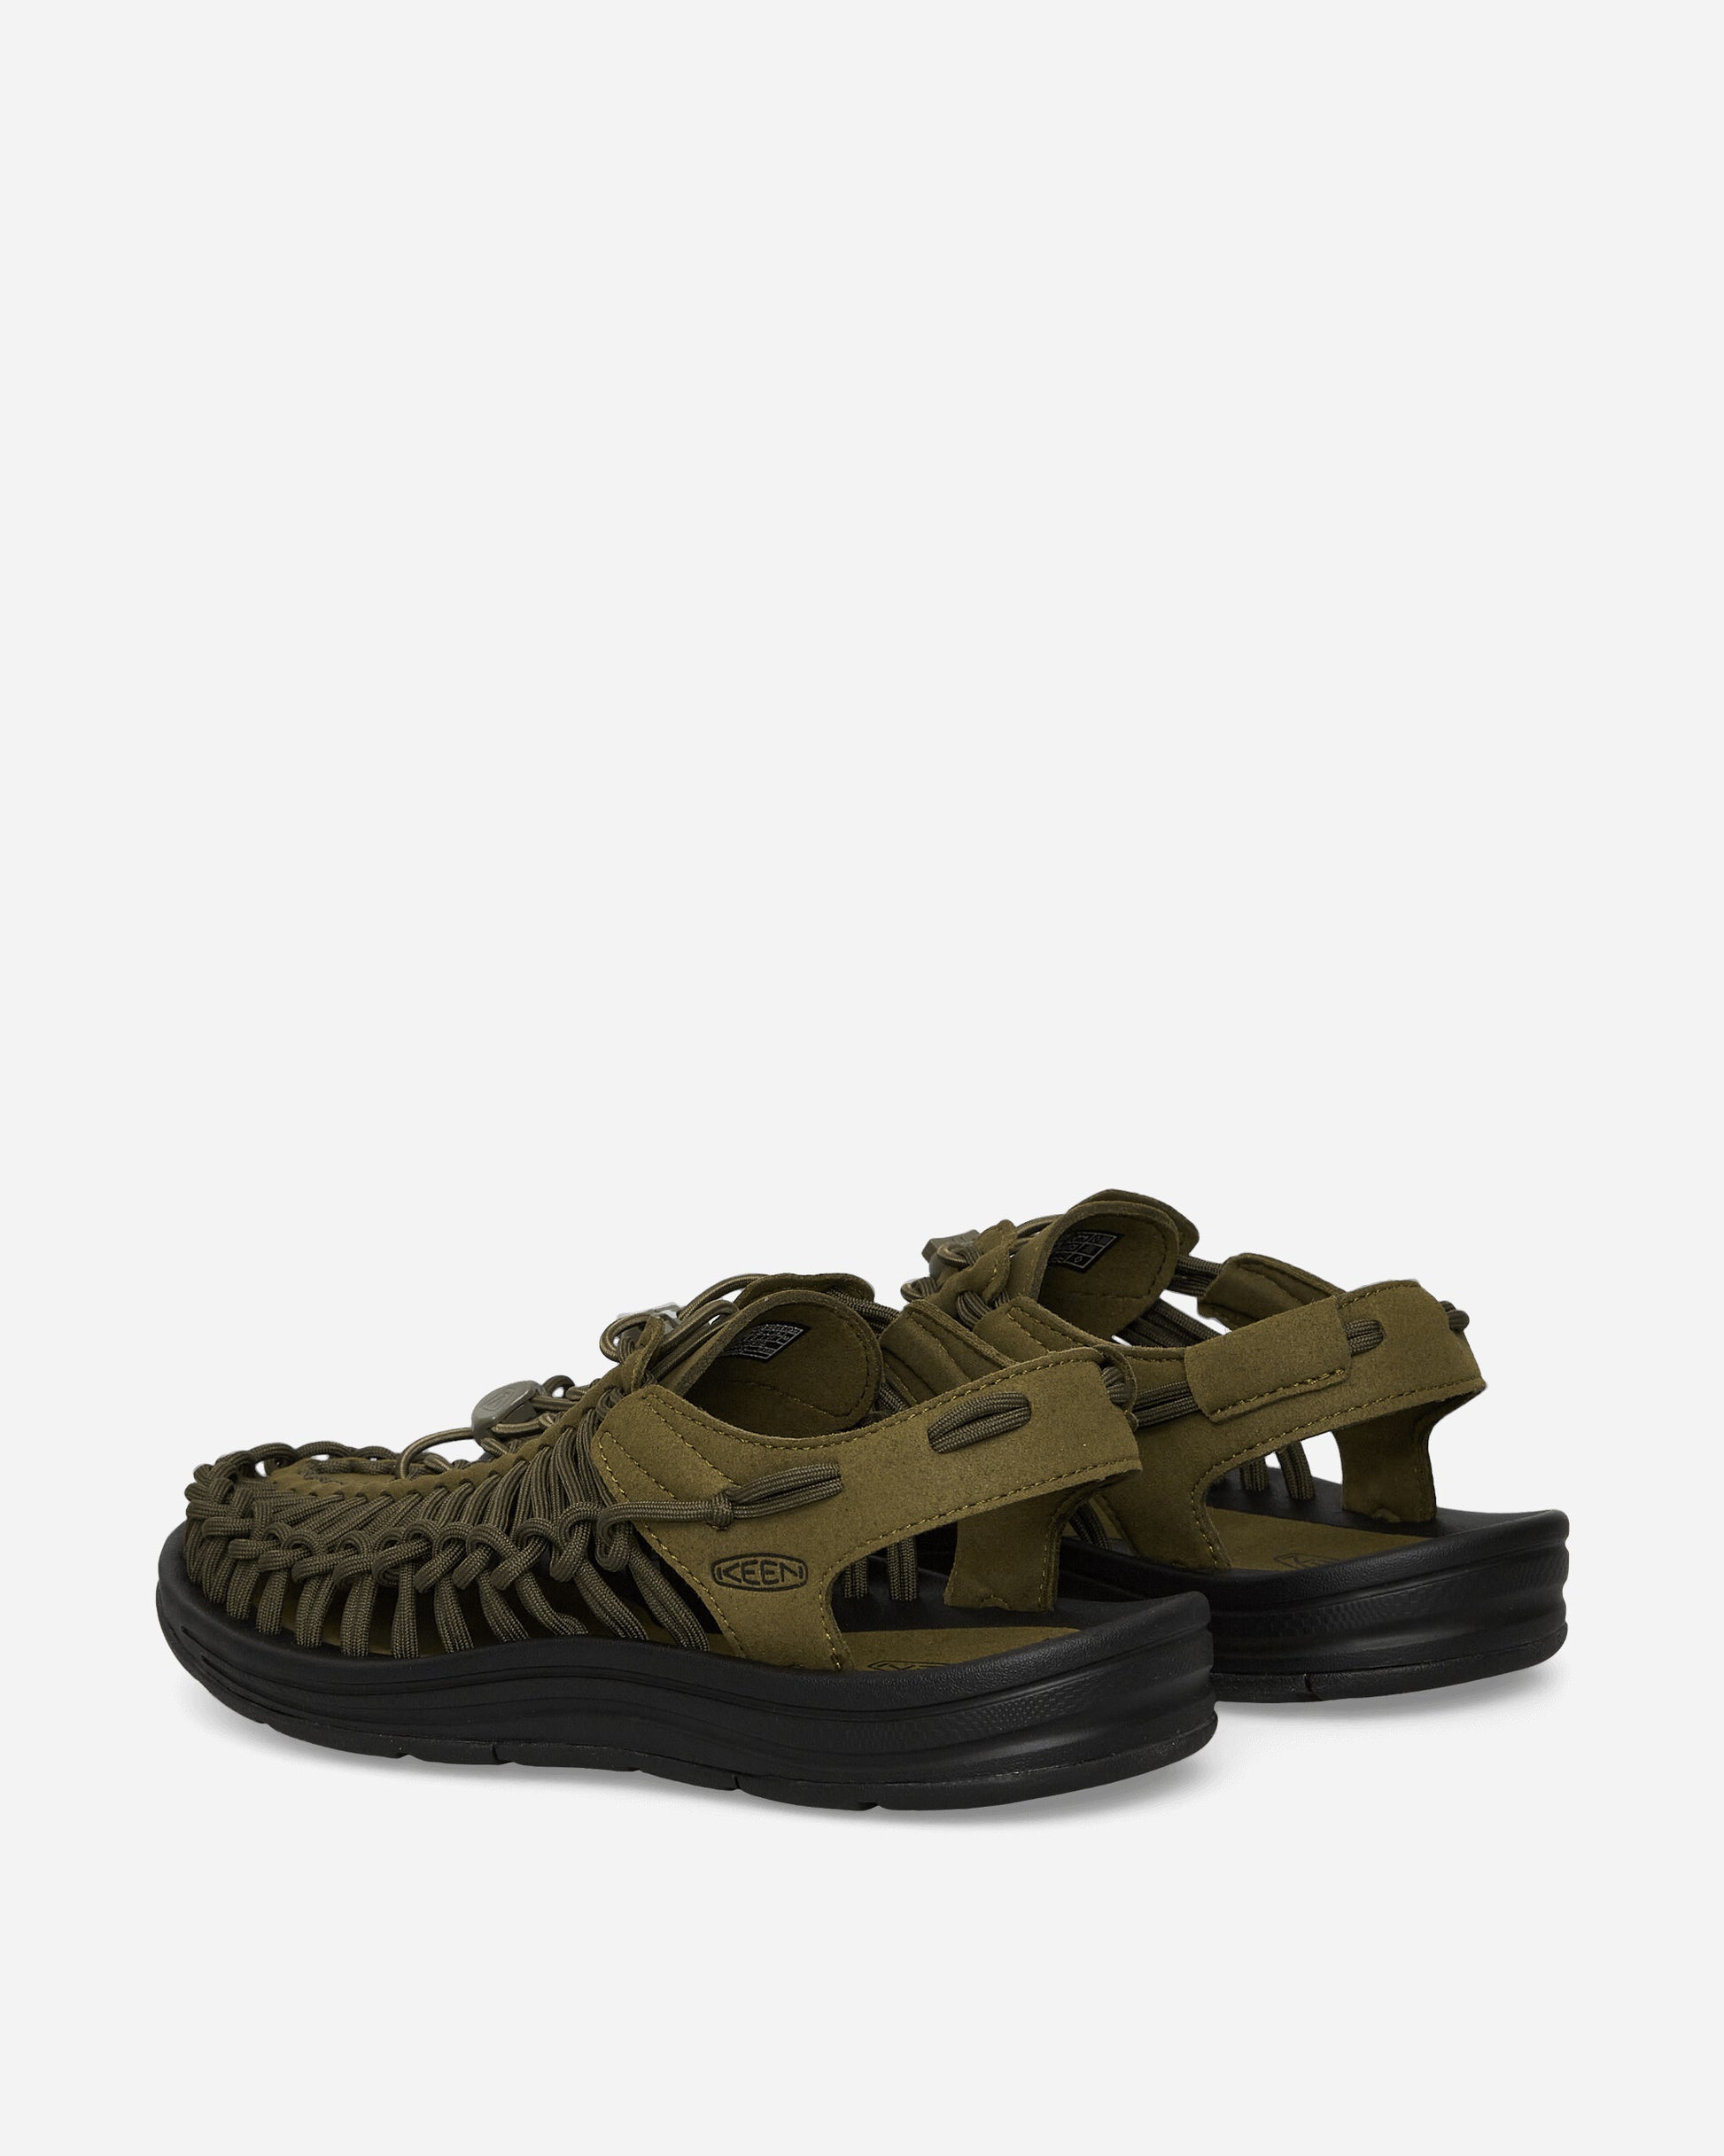 Keen Uneek Dark Olive/Black Sandals and Slides Sandals and Mules 1023381 001